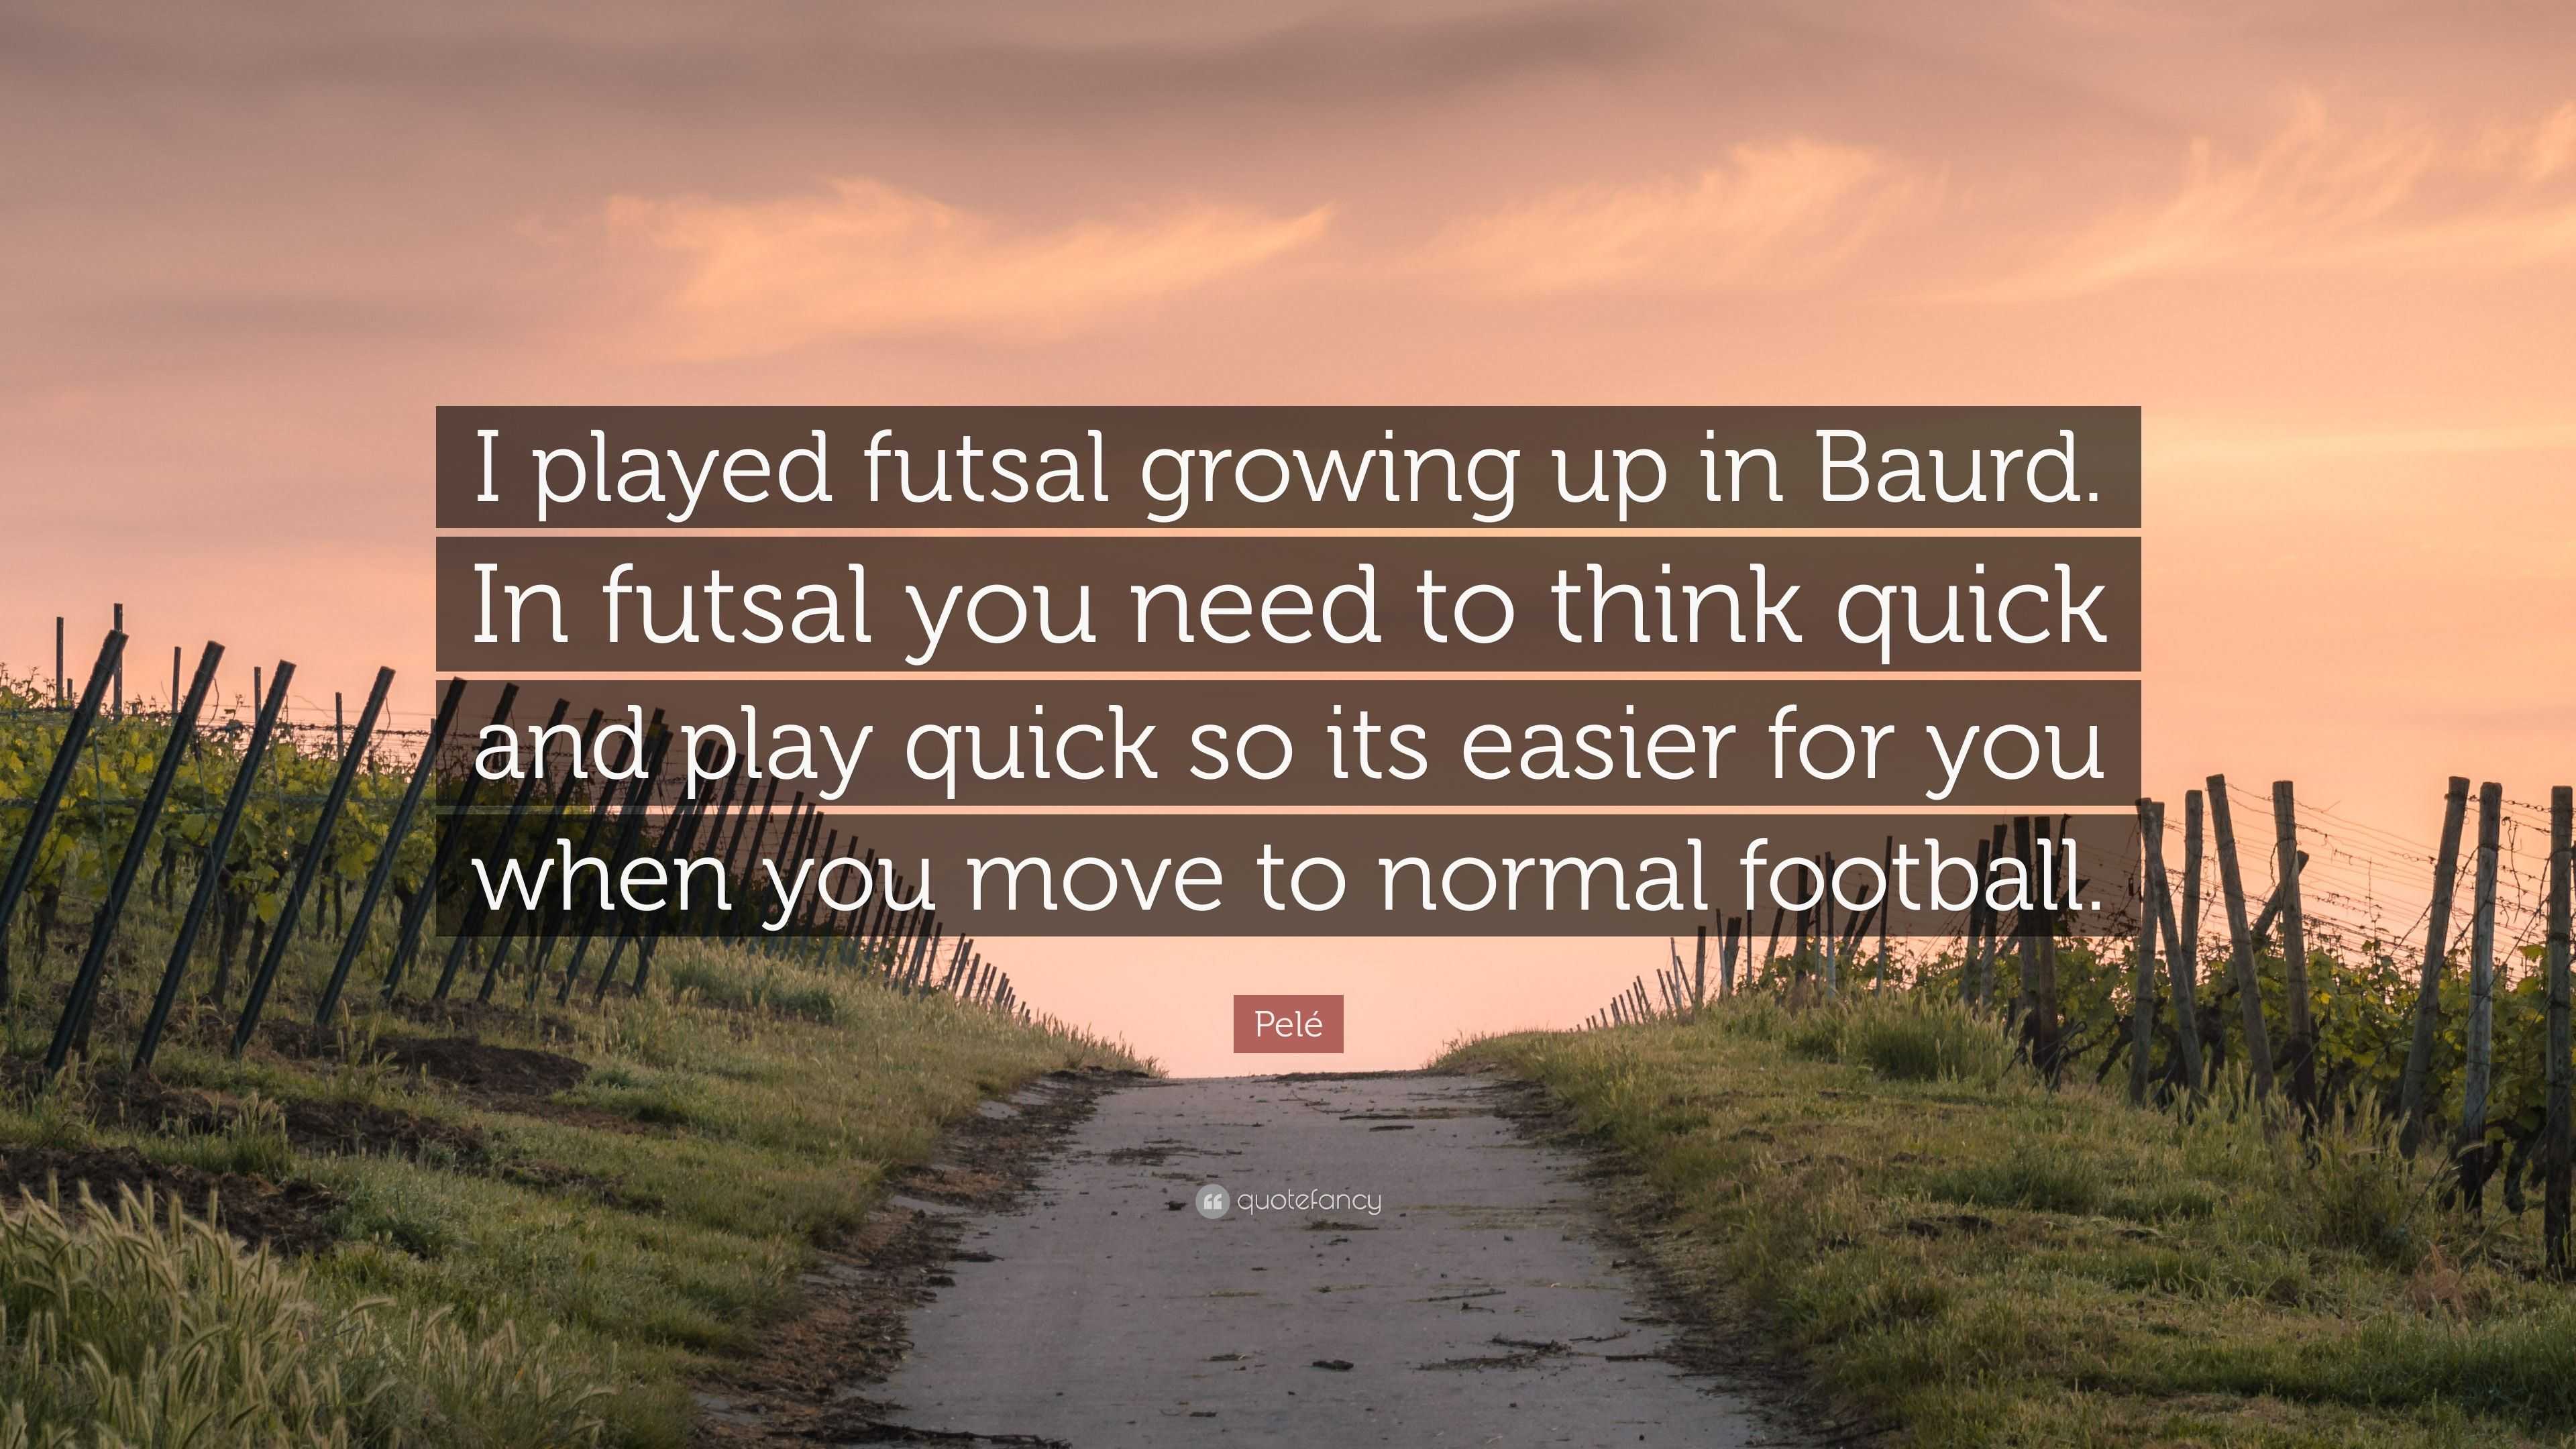 Pelé Quote: “I played futsal growing up in Baurd. In futsal you need to